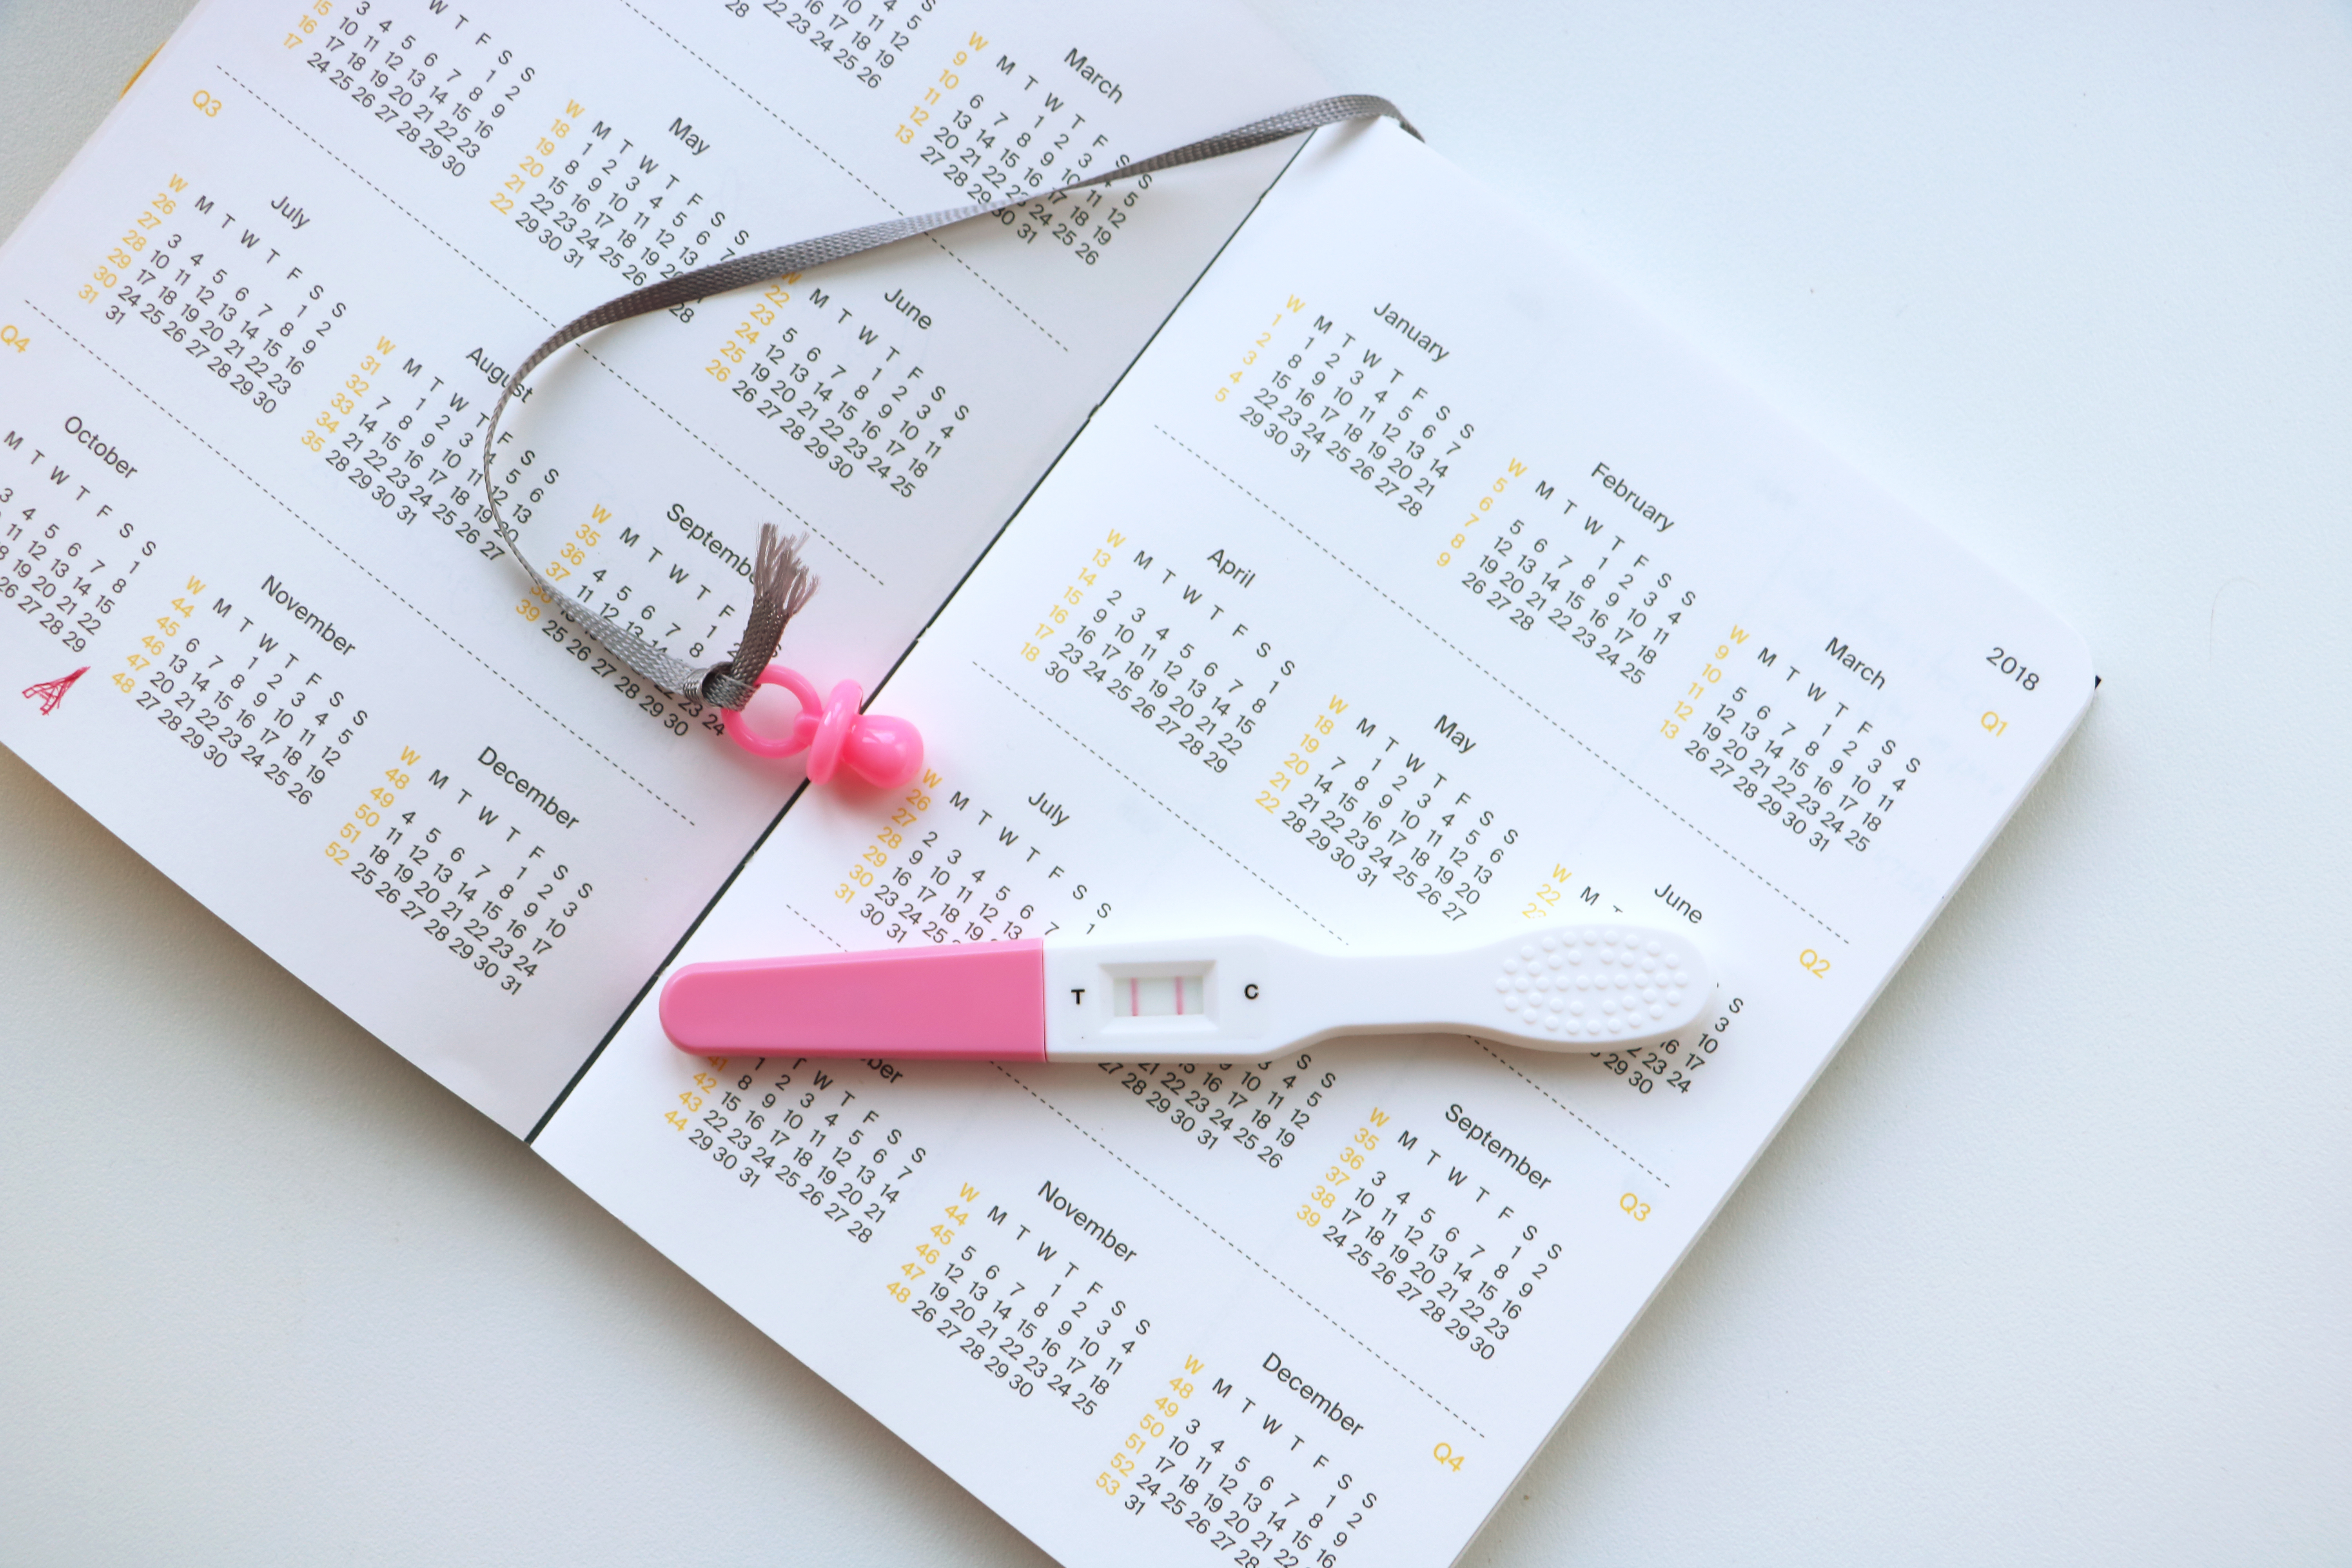 15 pregnancy calculators to help you pinpoint your pregnancy and conception dates. #conception #pregnancy